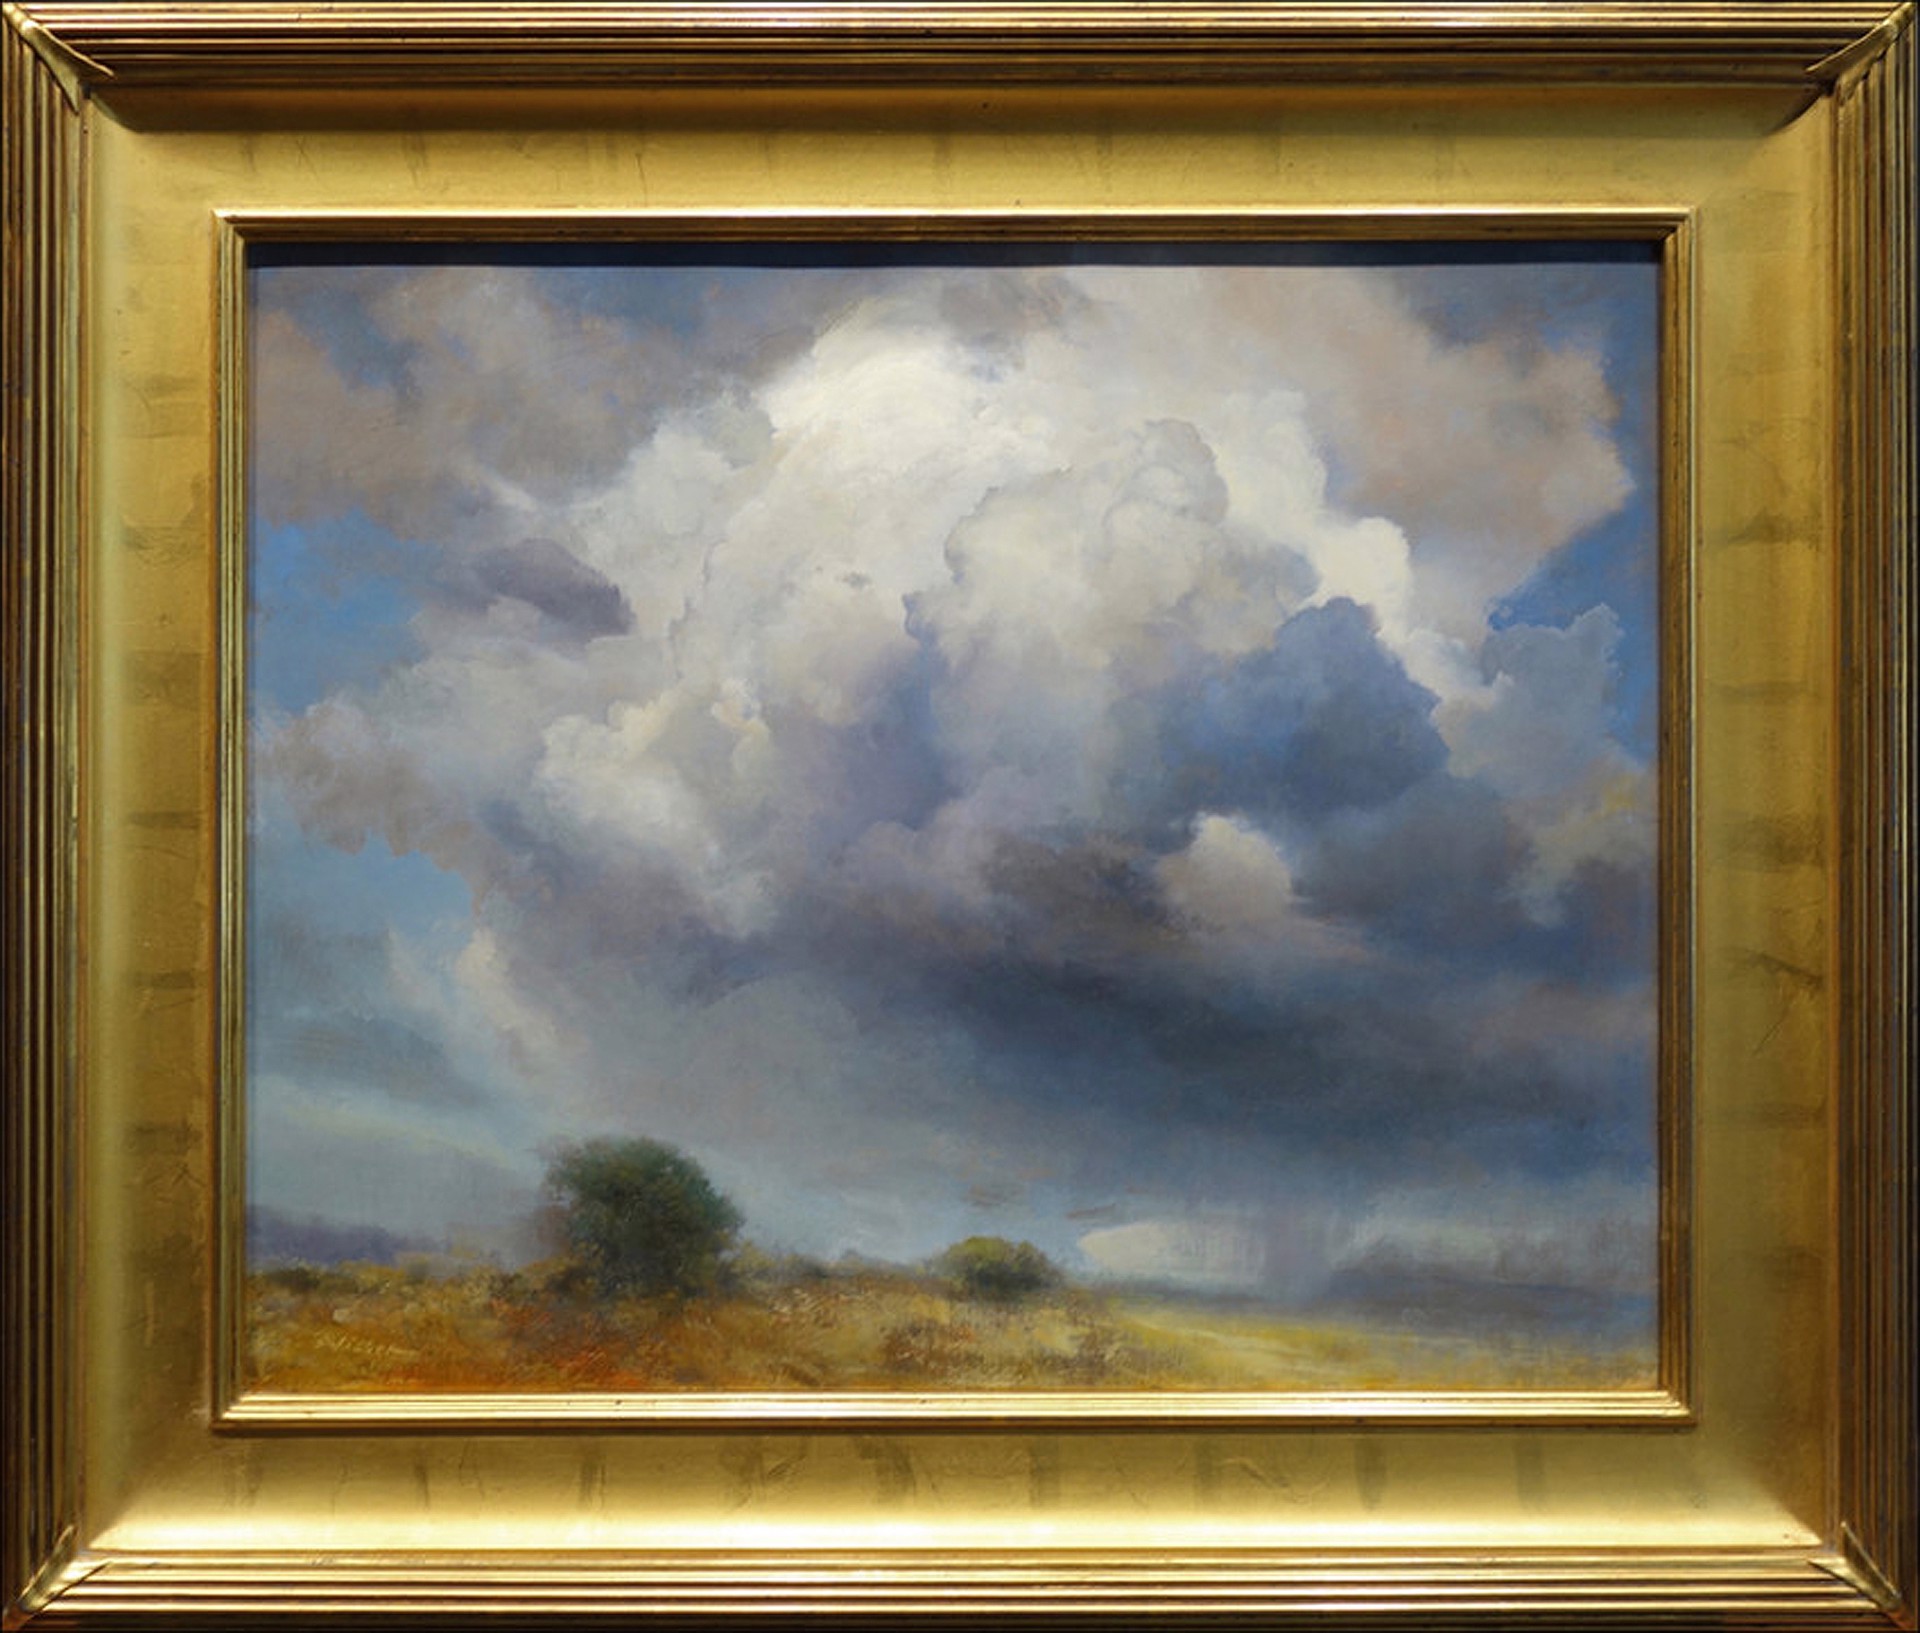 Storm at Pecos by P.A Nisbet